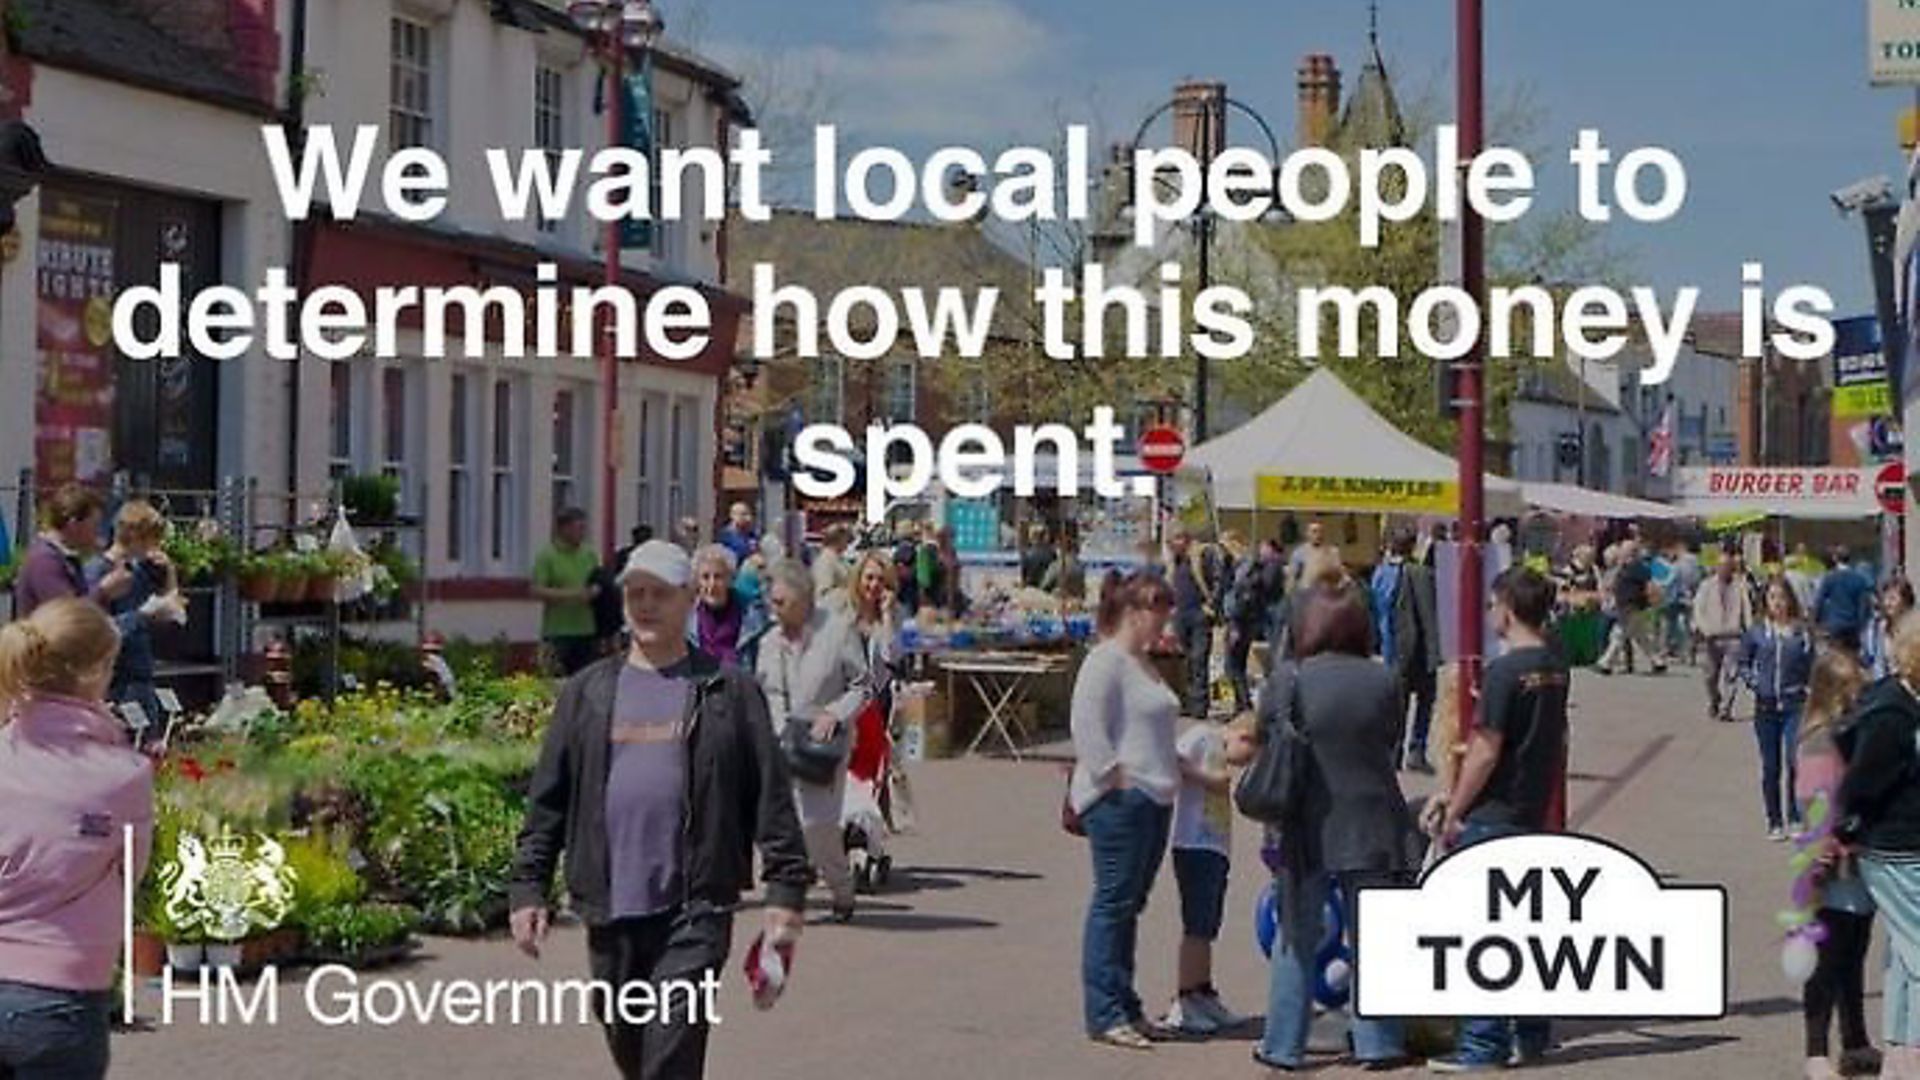 A promotion for the government's 'My Town' scheme. Photograph: Government. - Credit: Archant